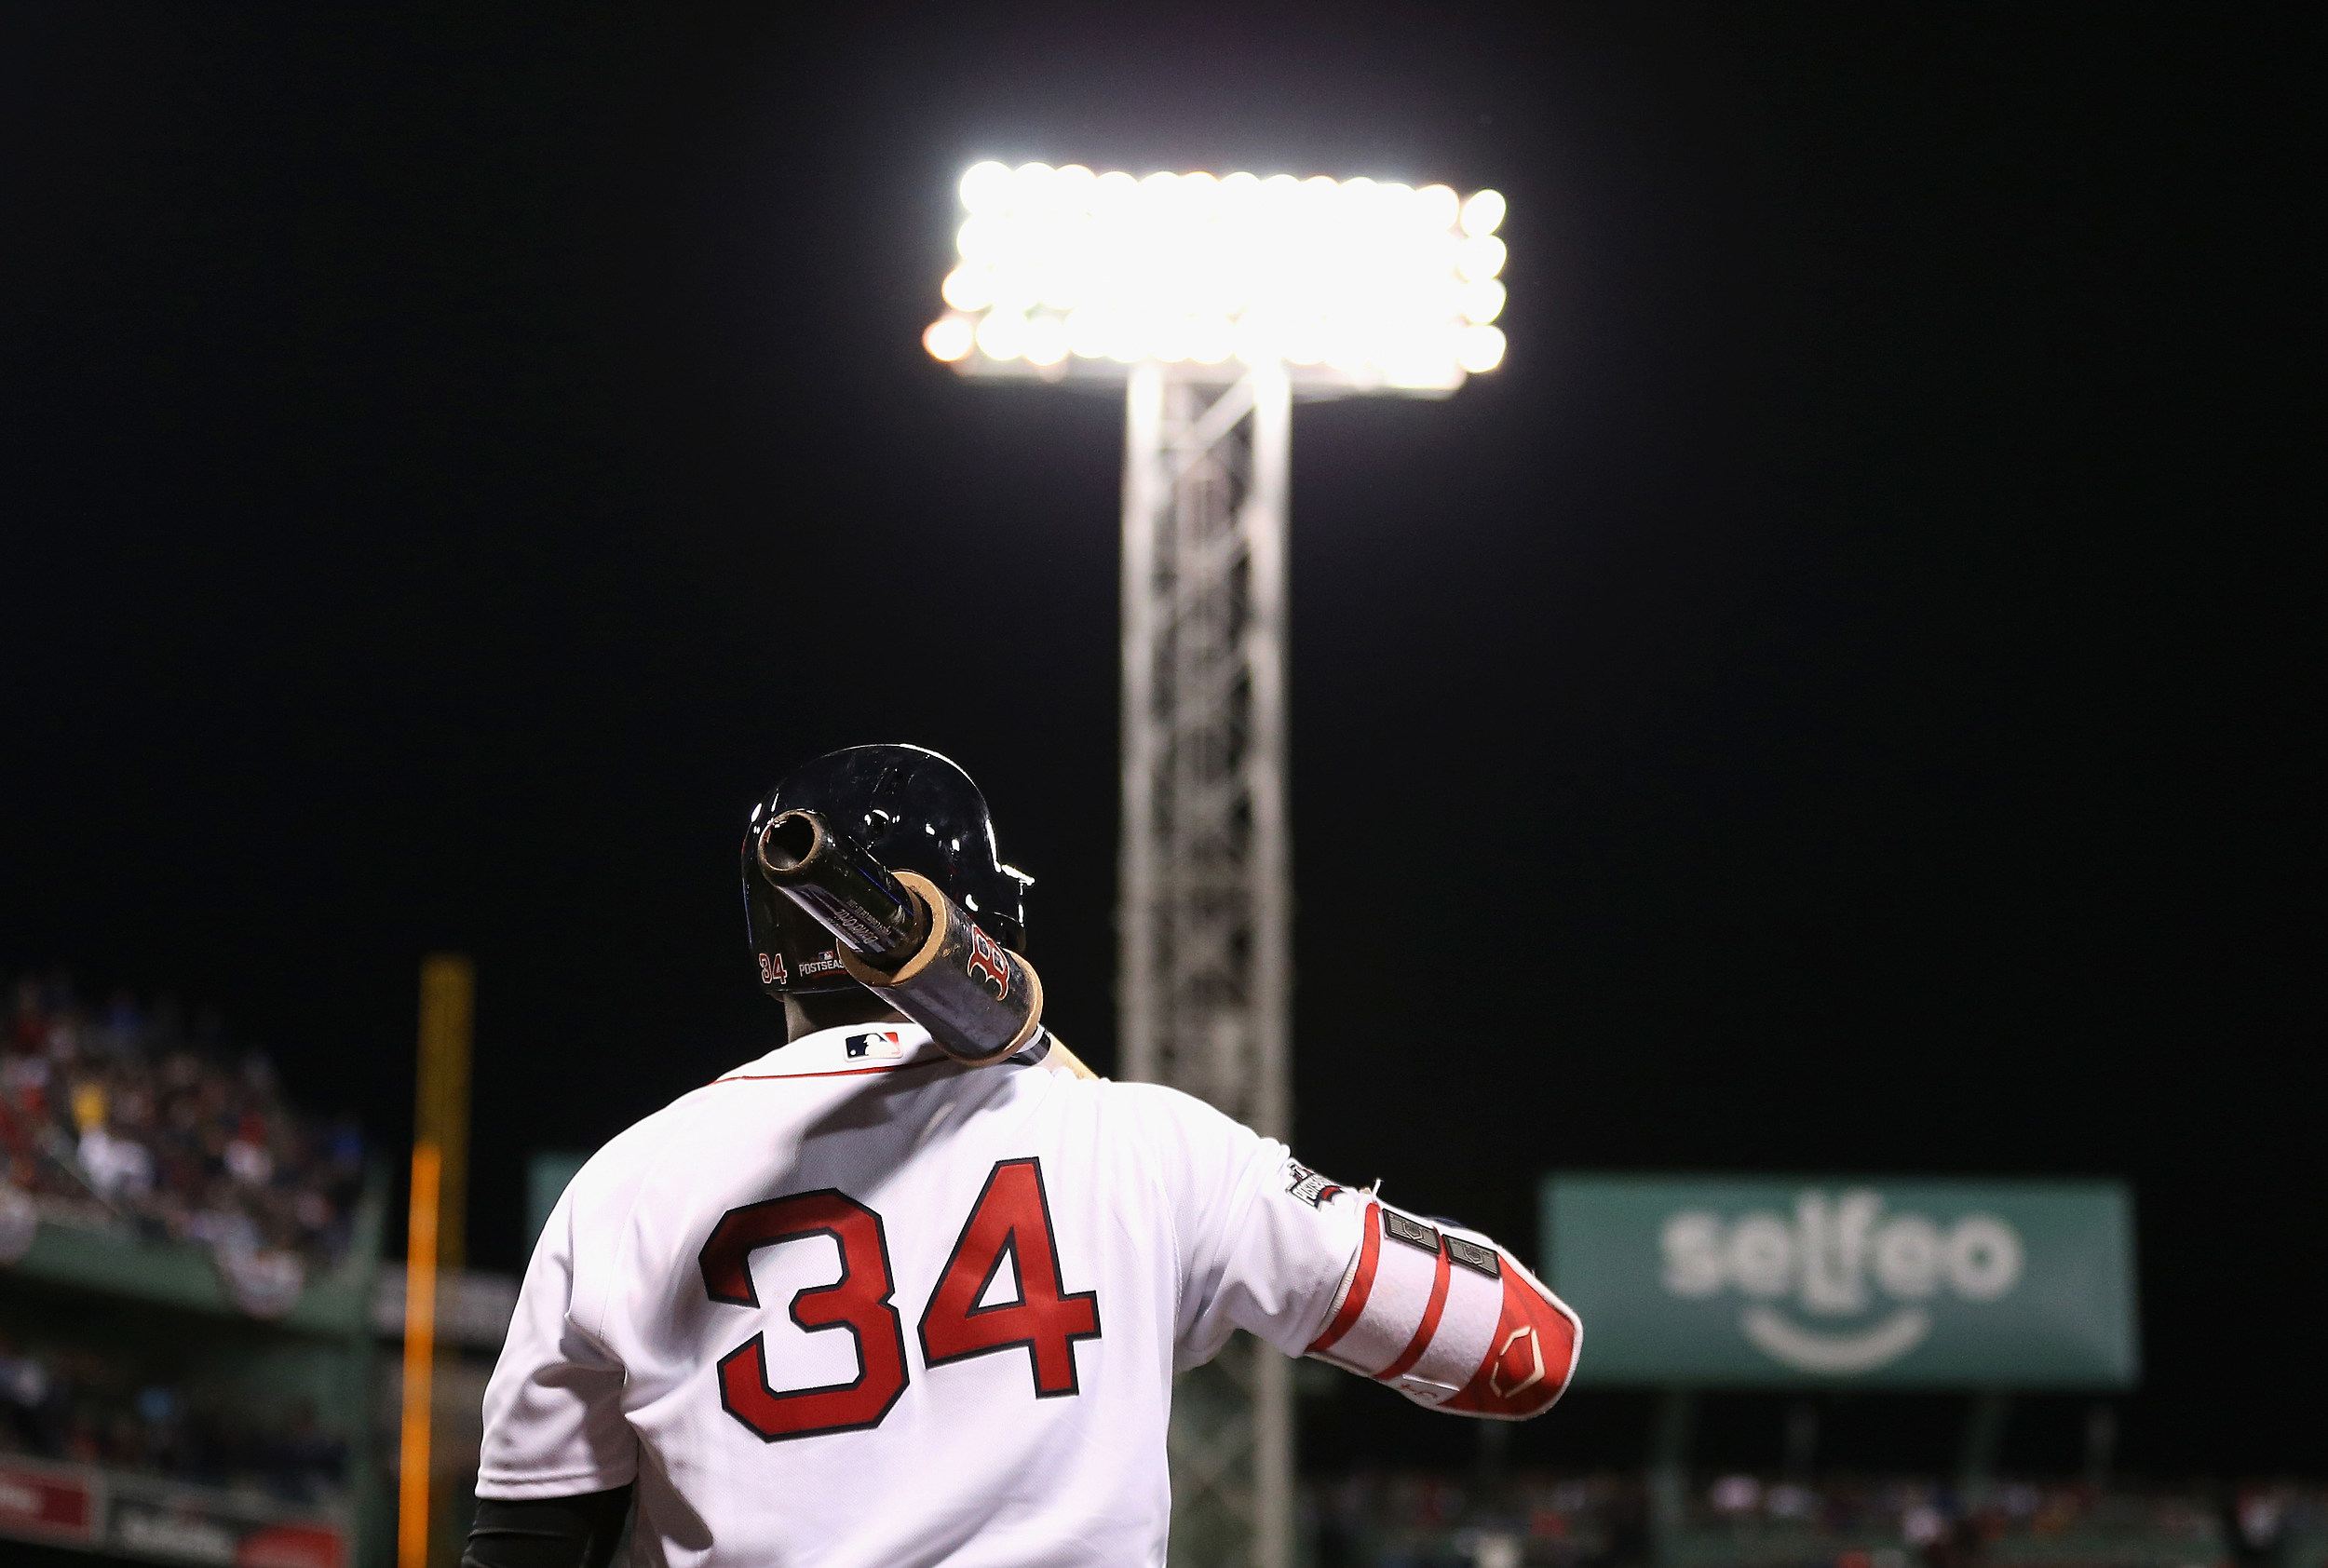 Reliving The Best From Big Papi [VIDEO]